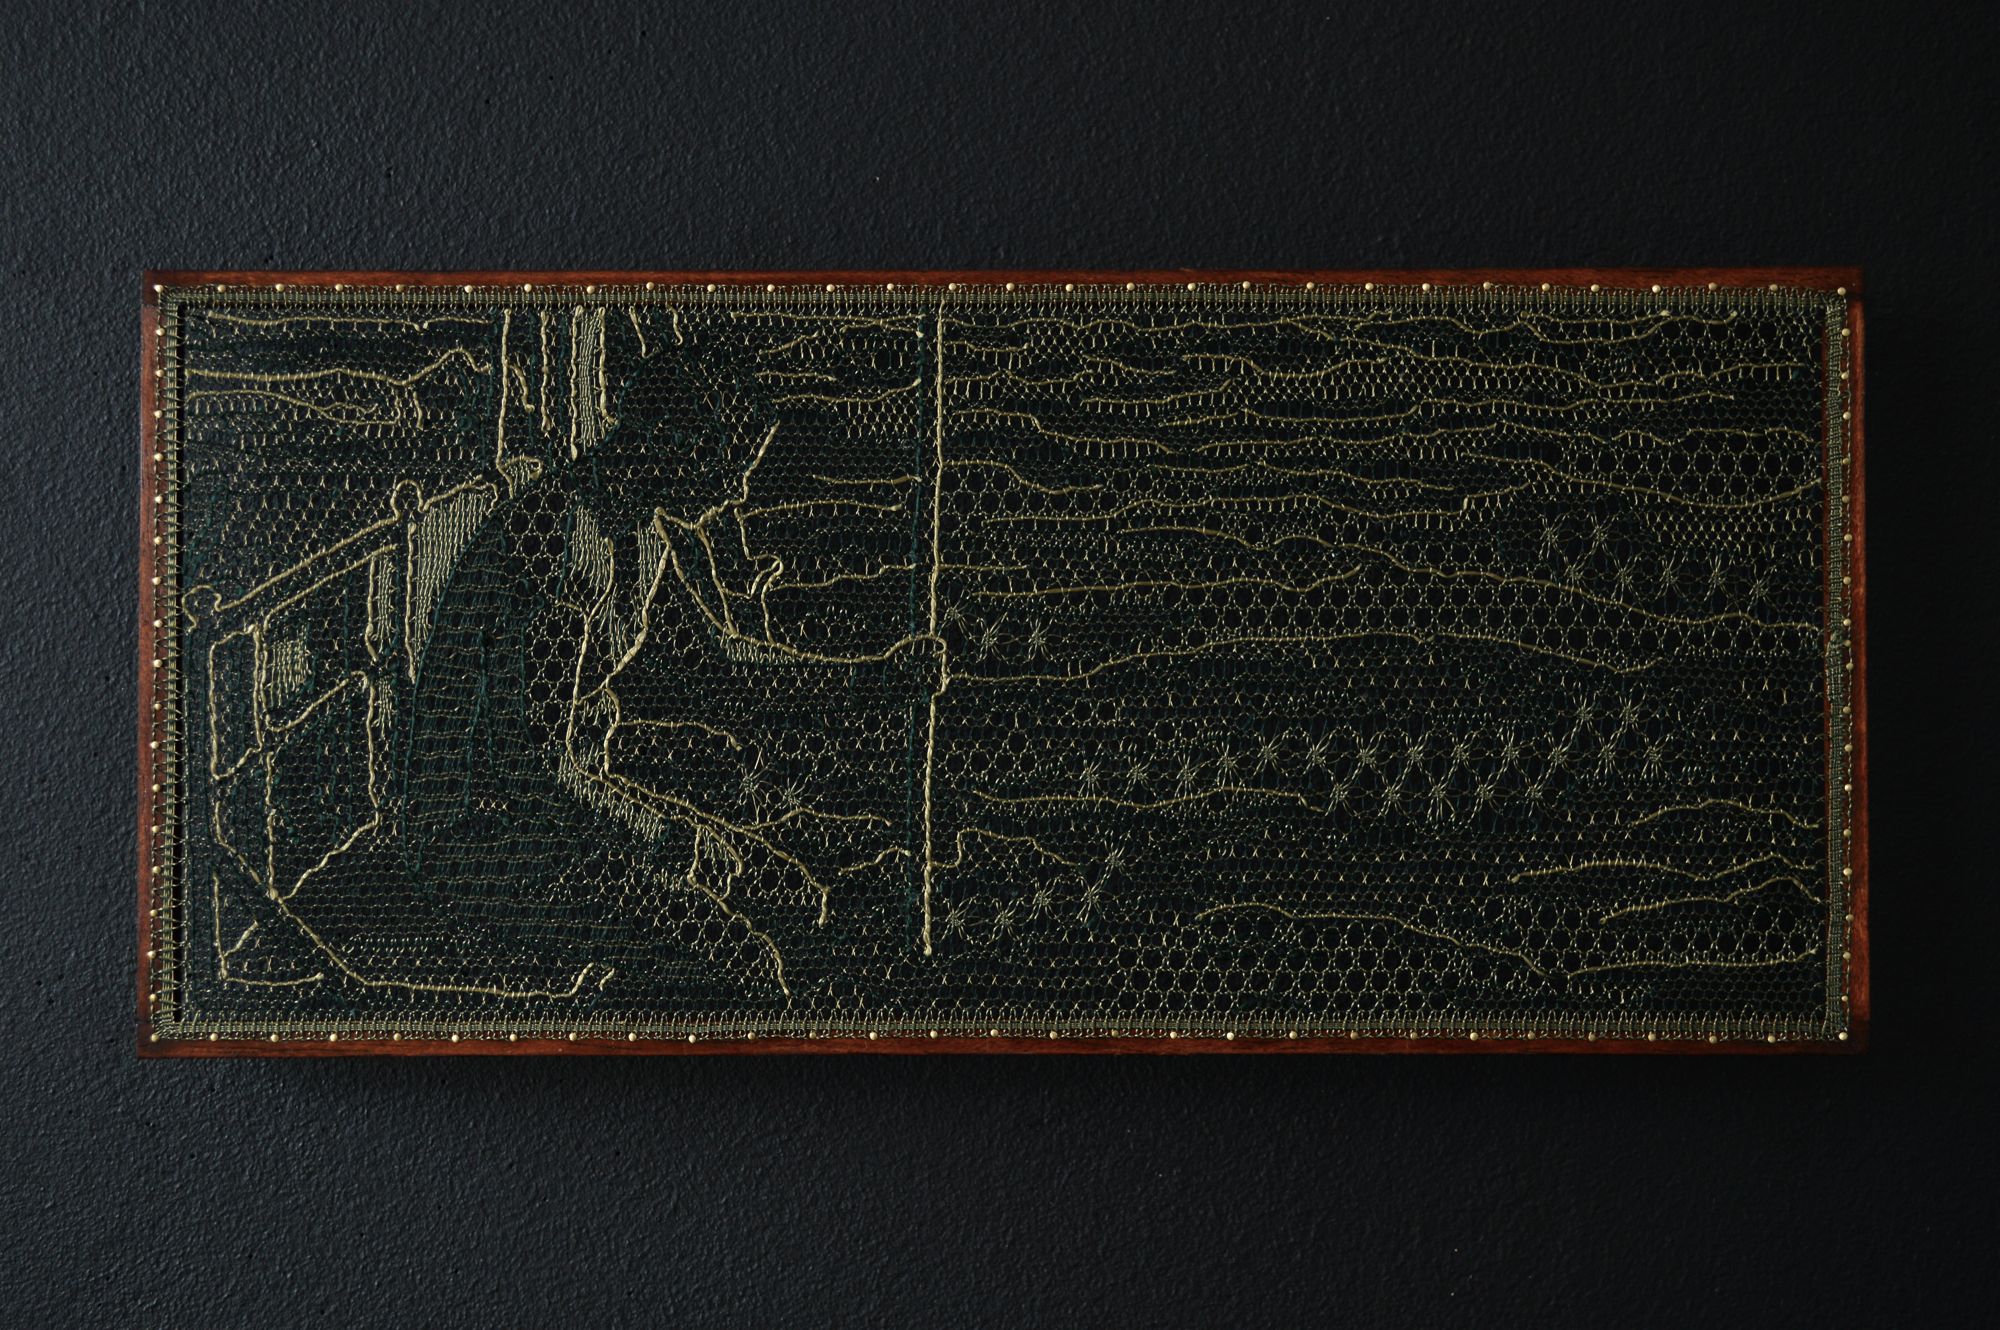 Pierre Fouché . James. 2015. Silk floss, wood, brass pins. 144 x 328mm. Private collection.